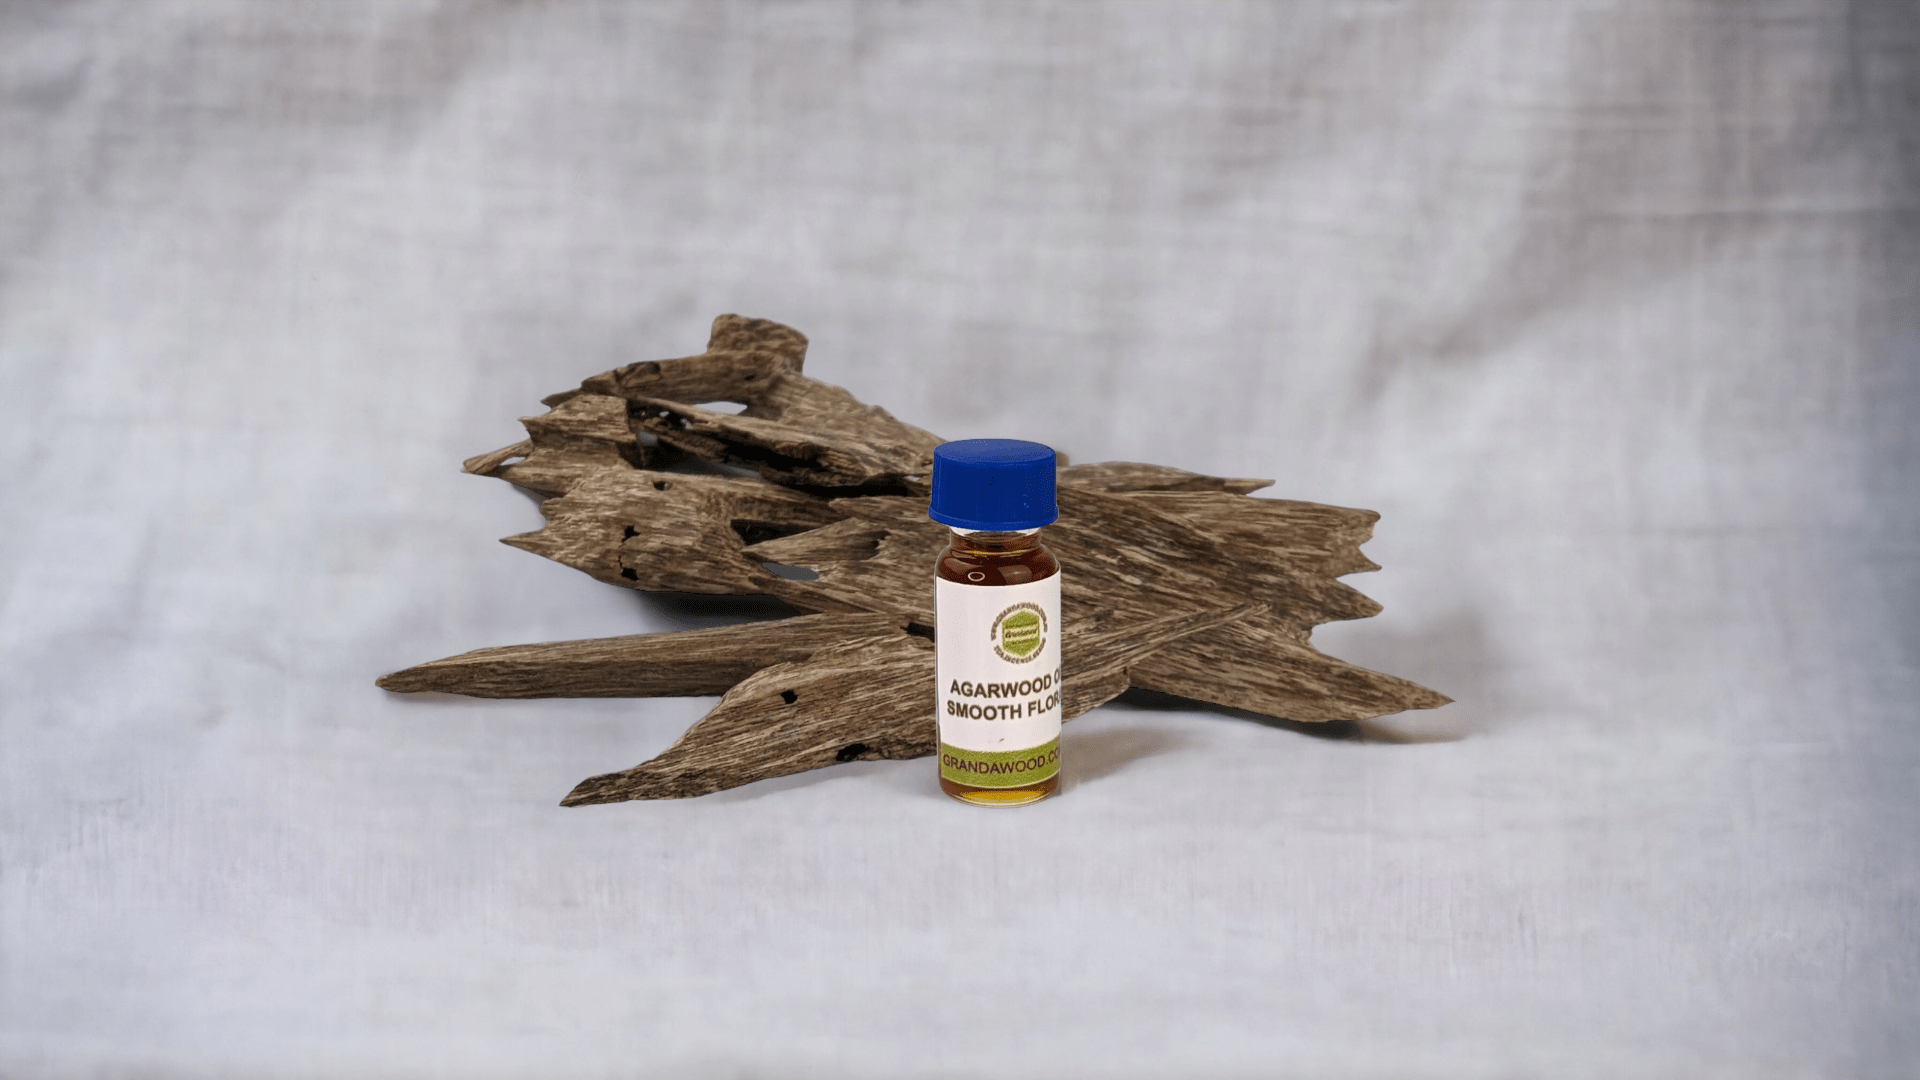 100% Pure Cultivated Agarwood Oil (Oud) Specialty- Super Smooth Floral Oud - 1.5ml